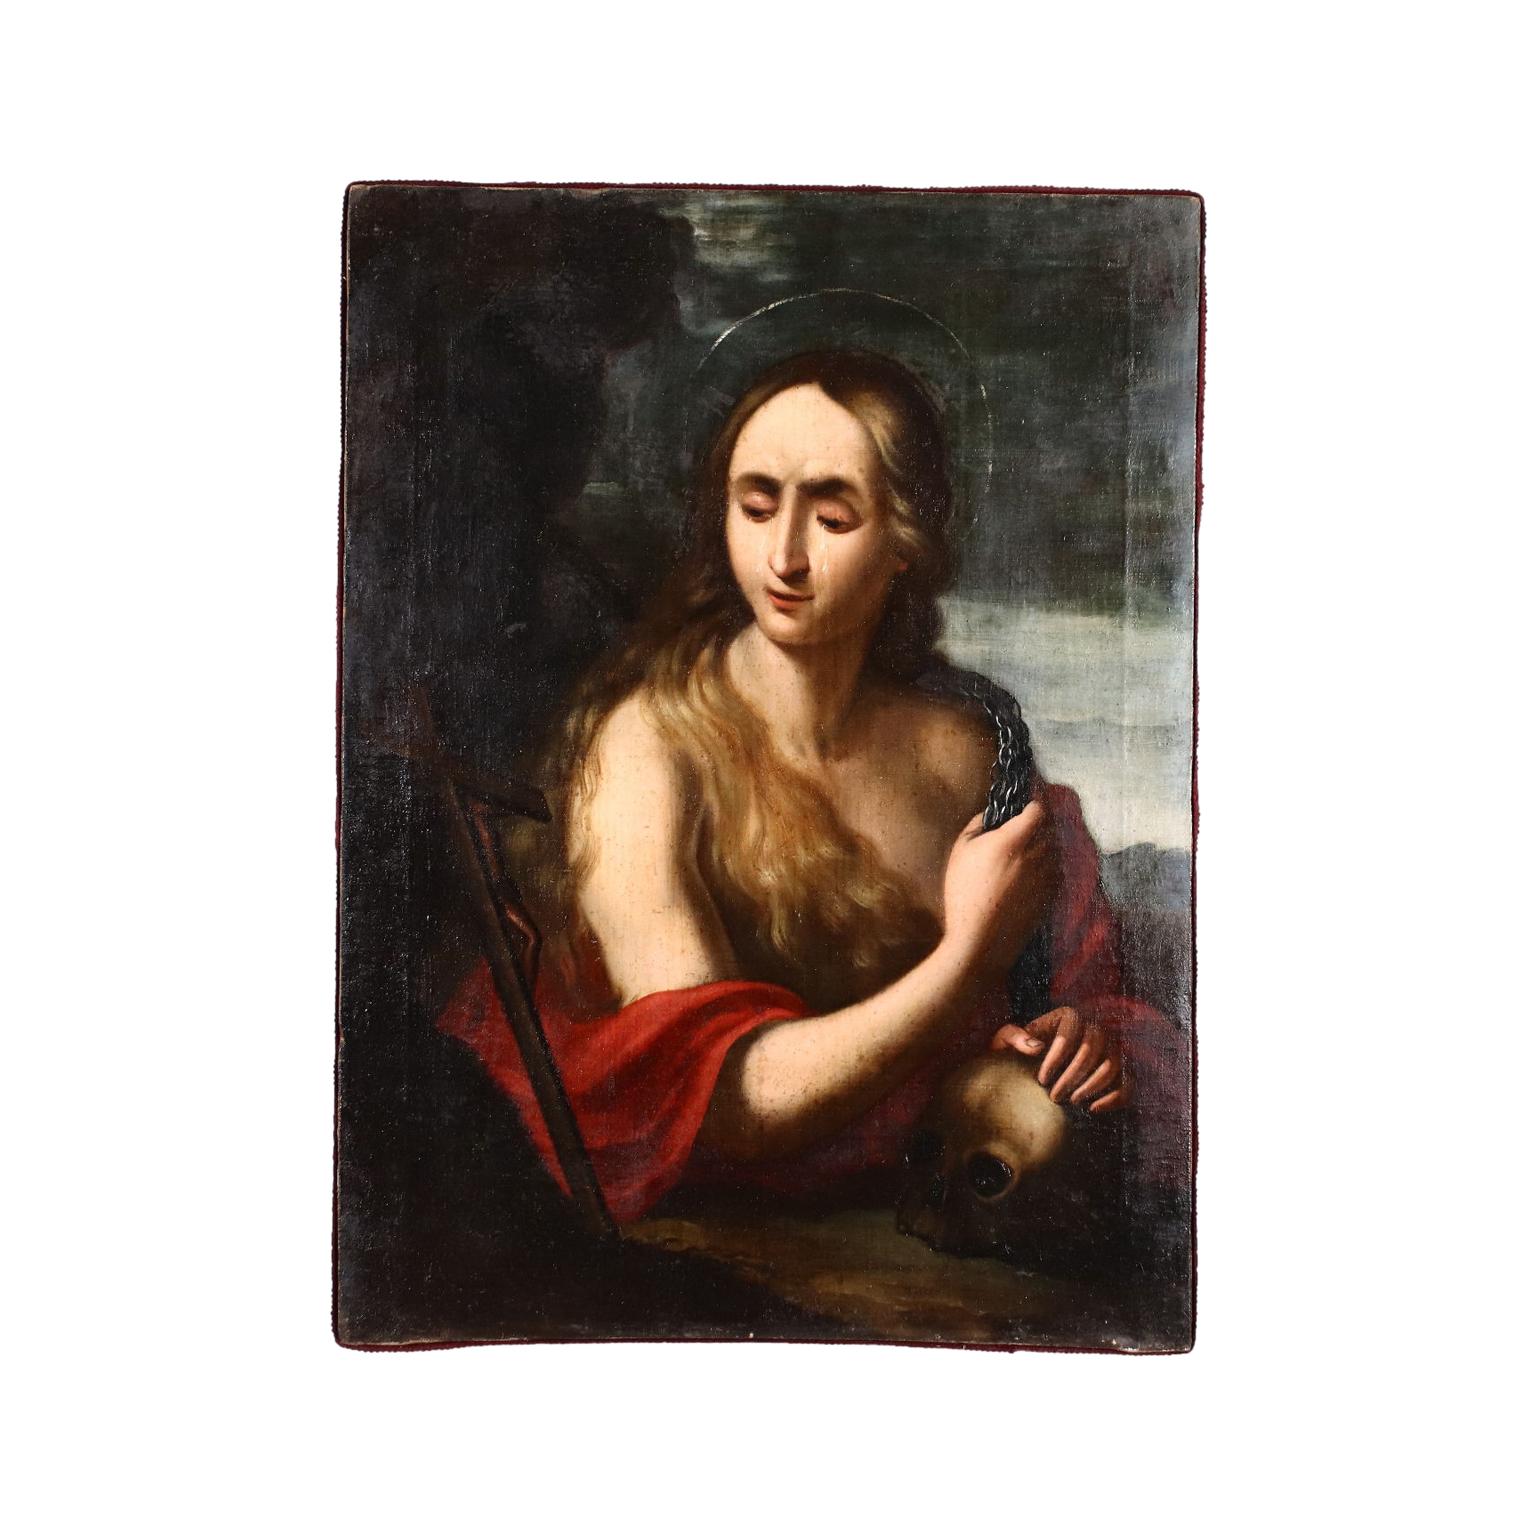 Unknown Portrait Painting - Penitent Magdalene, Oil painting on canvas, 1600s